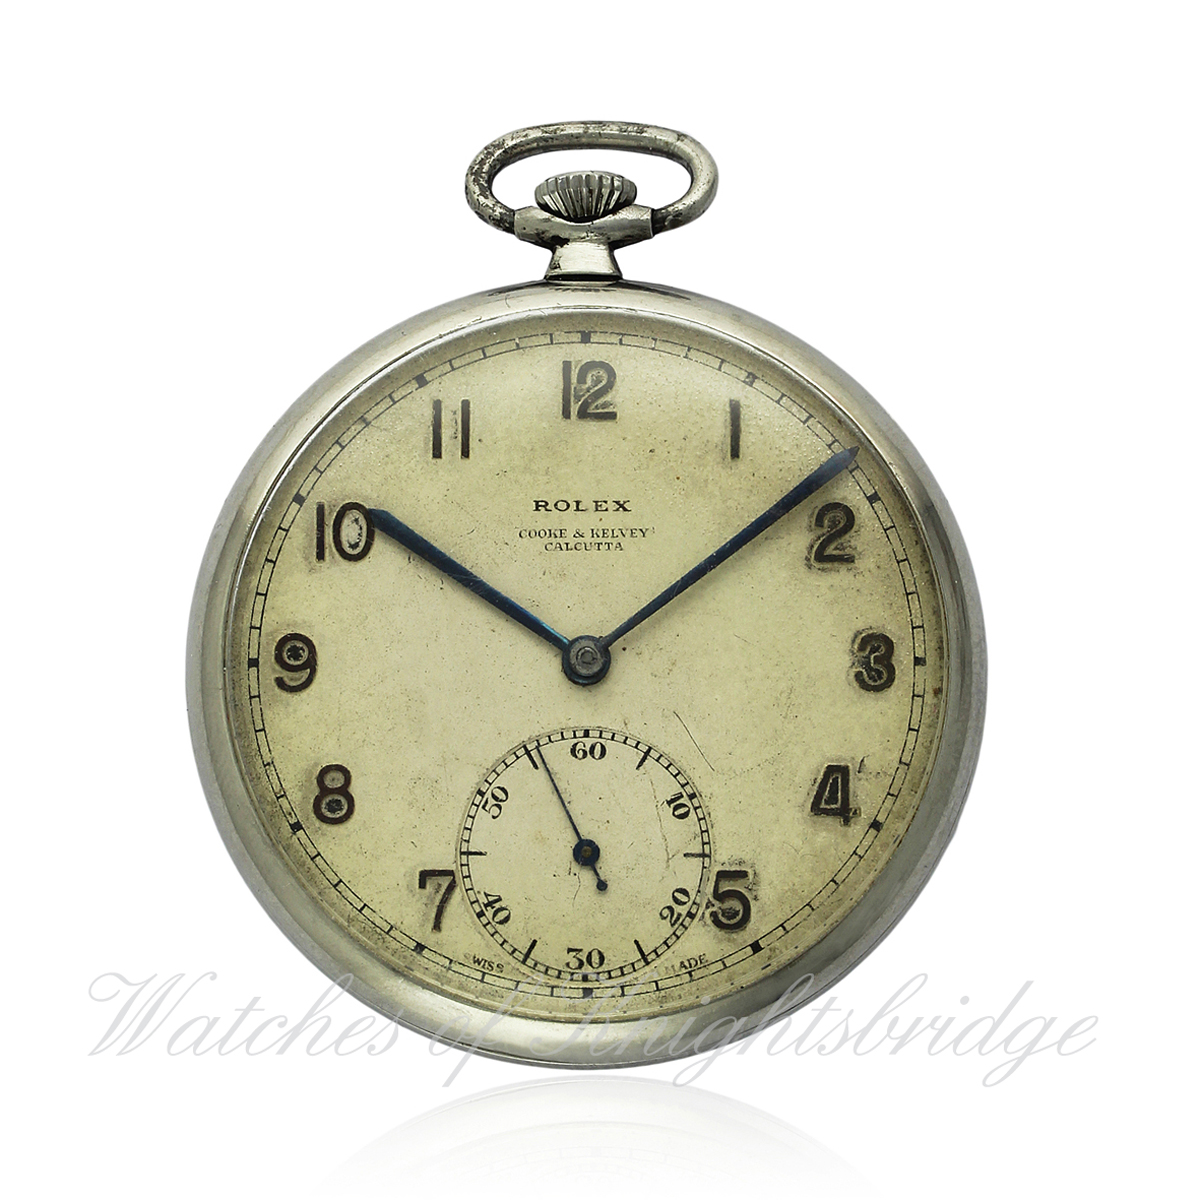 A GENTLEMAN`S STAINLESS STEEL ROLEX POCKET WATCH CIRCA 1920s, REF 3018 RETAILED BY COOKE & KELVEY